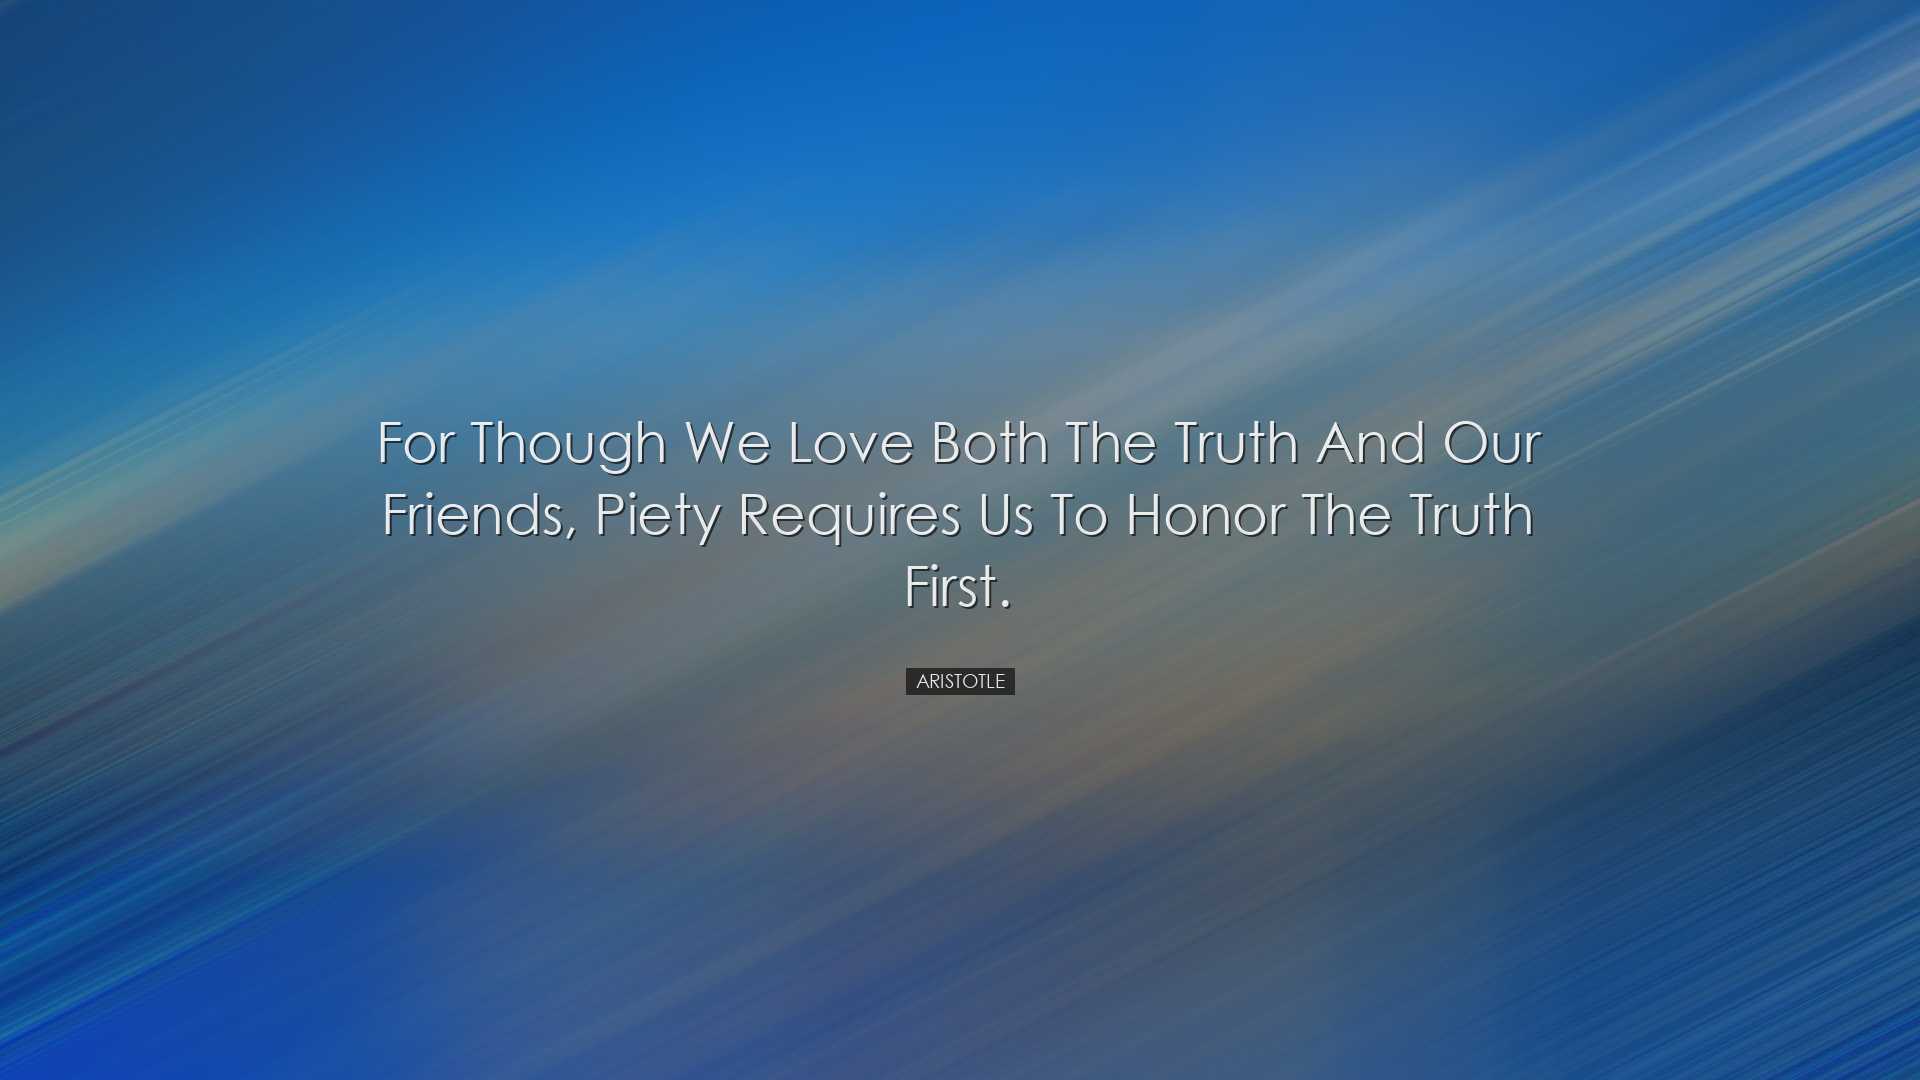 For though we love both the truth and our friends, piety requires